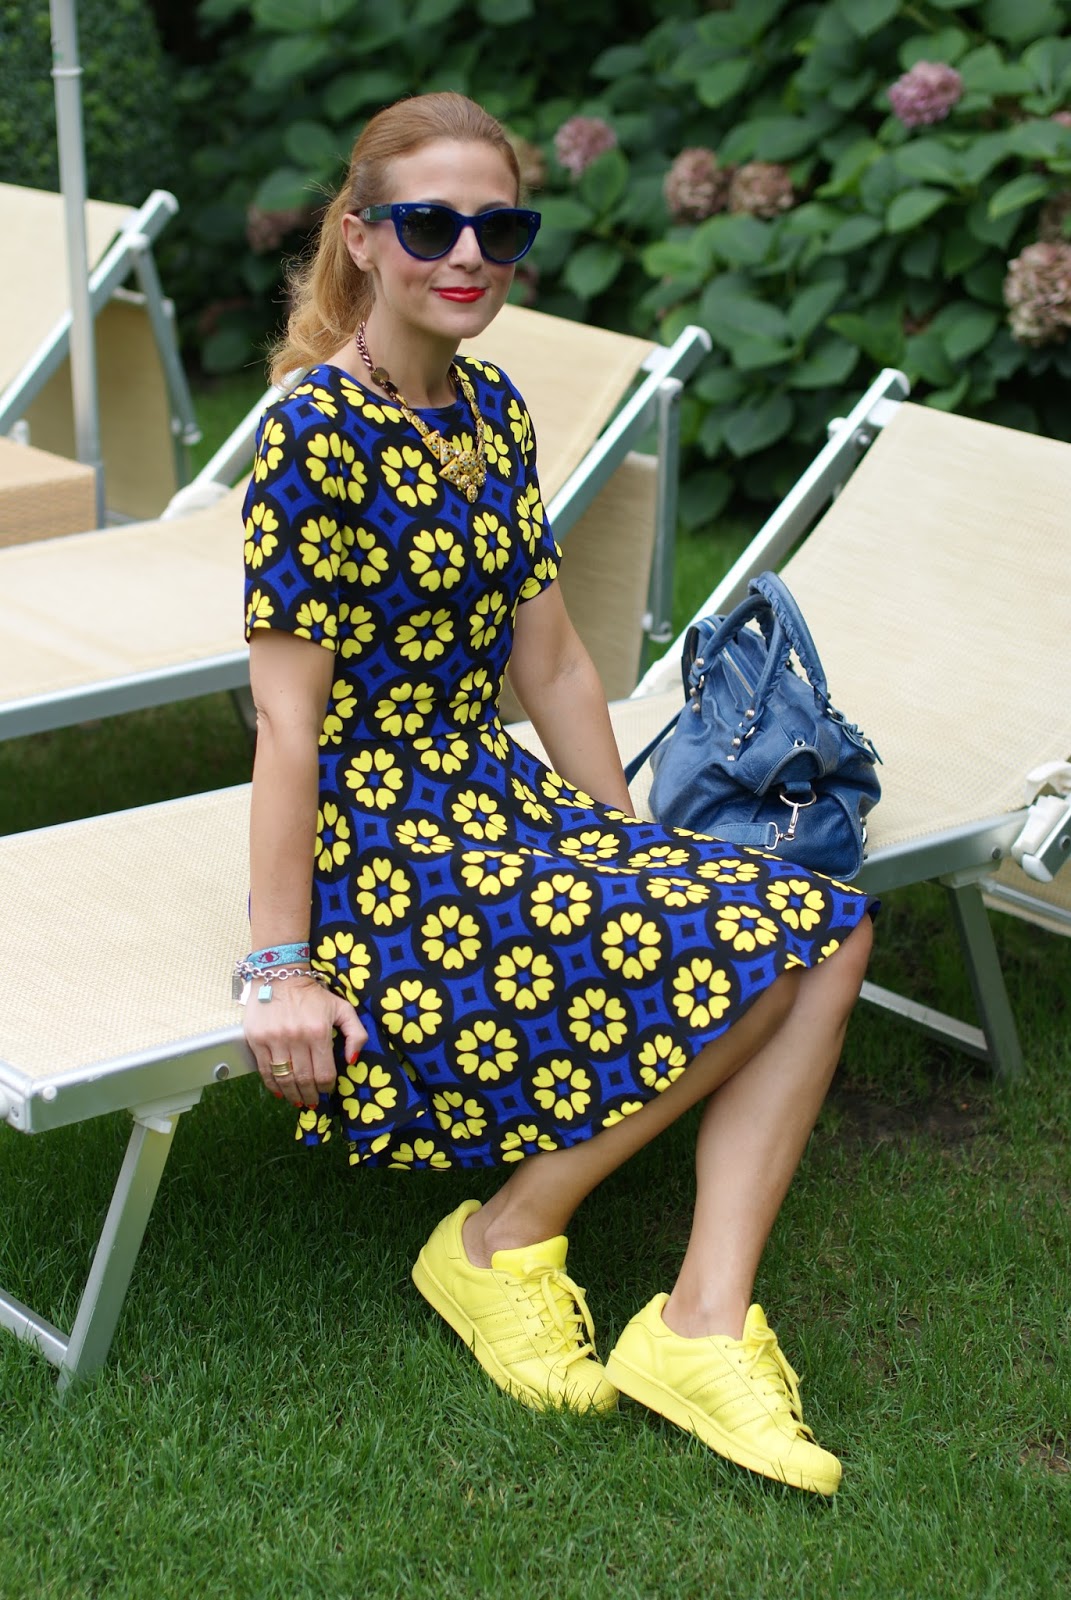 Daisy print skater dress with adidas Supercolor yellow sneakers on Fashion and Cookies fashion blog, fashion blogger girly style